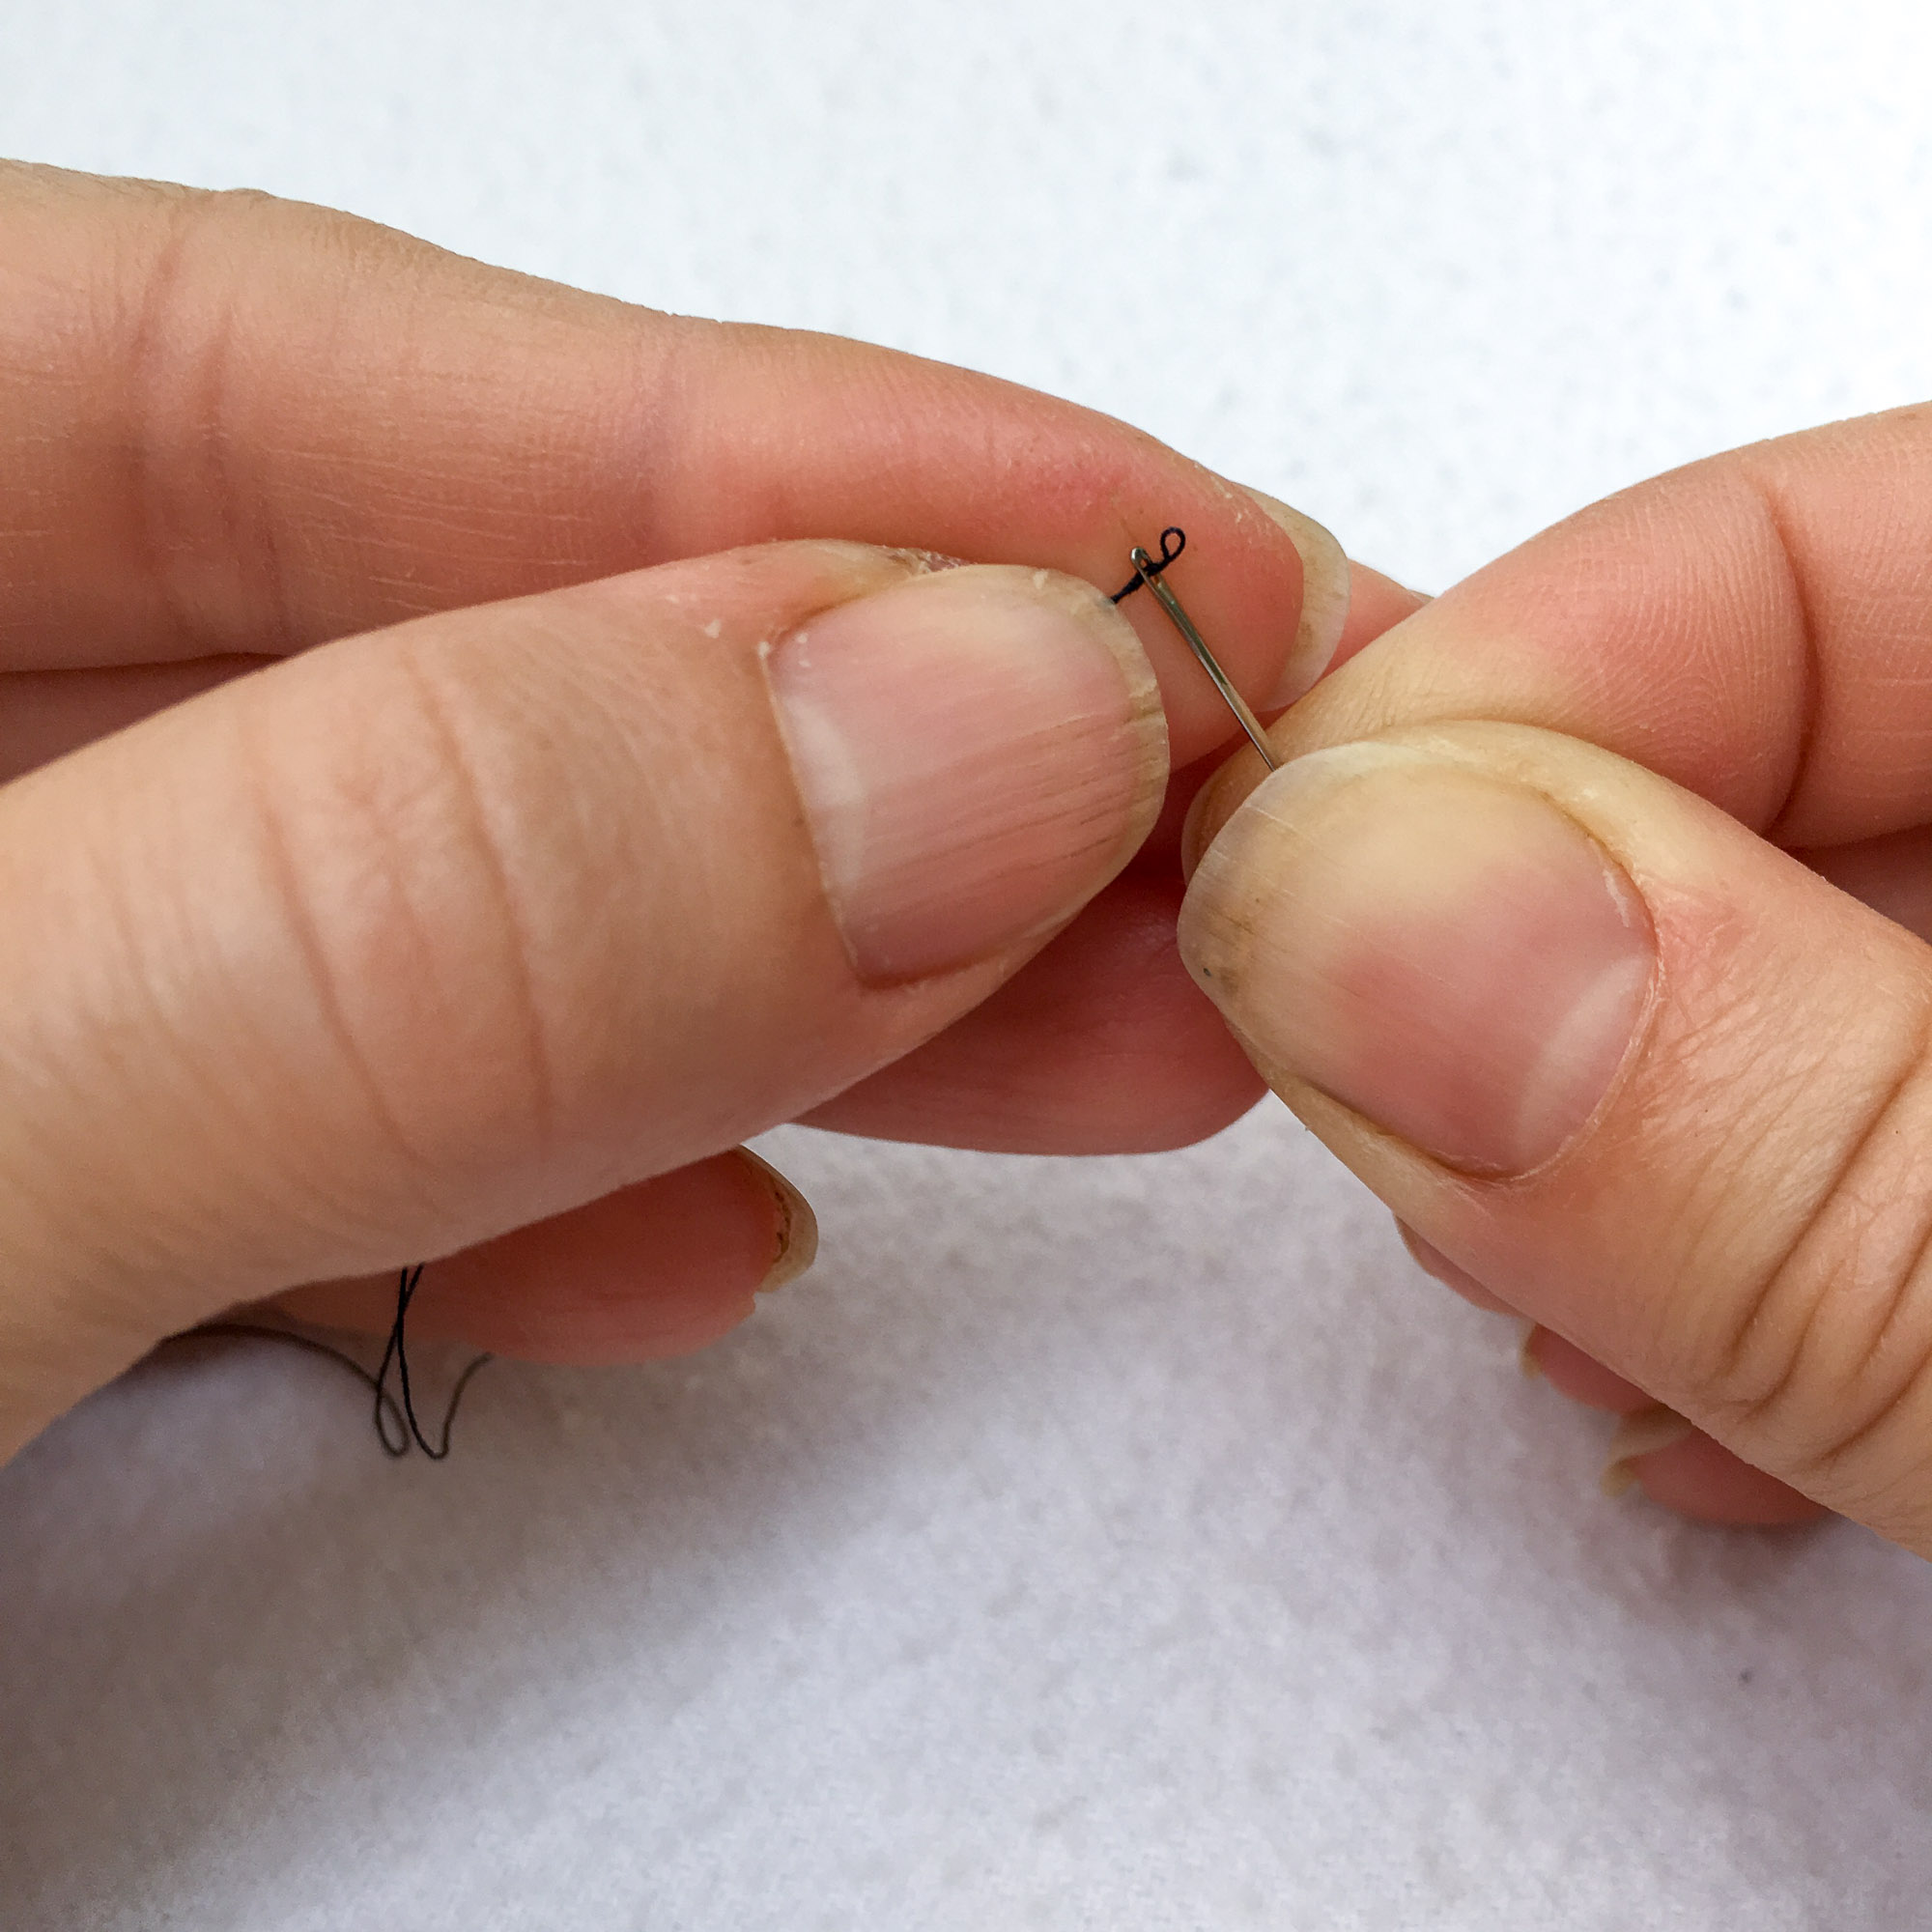 Easy Hack for Threading a Needle